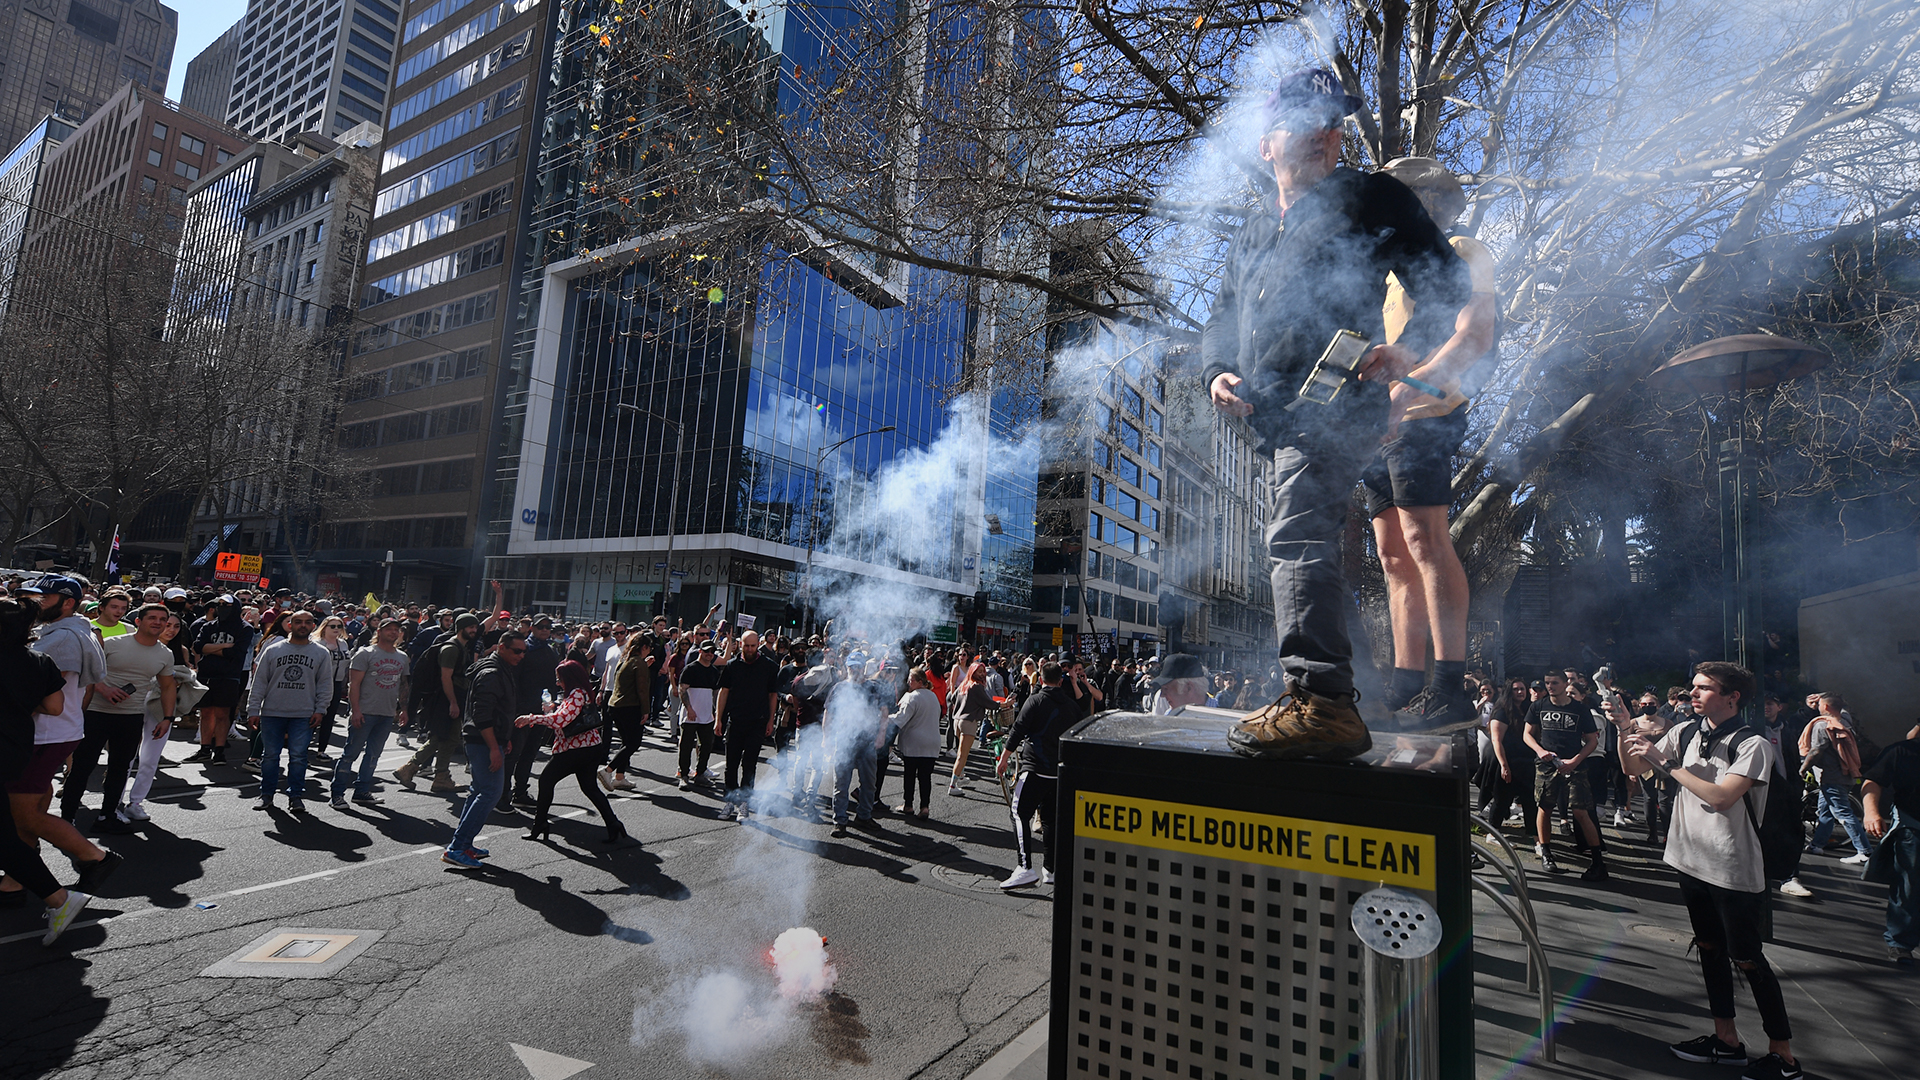 clean anti lockdown protesters clash with police in australia